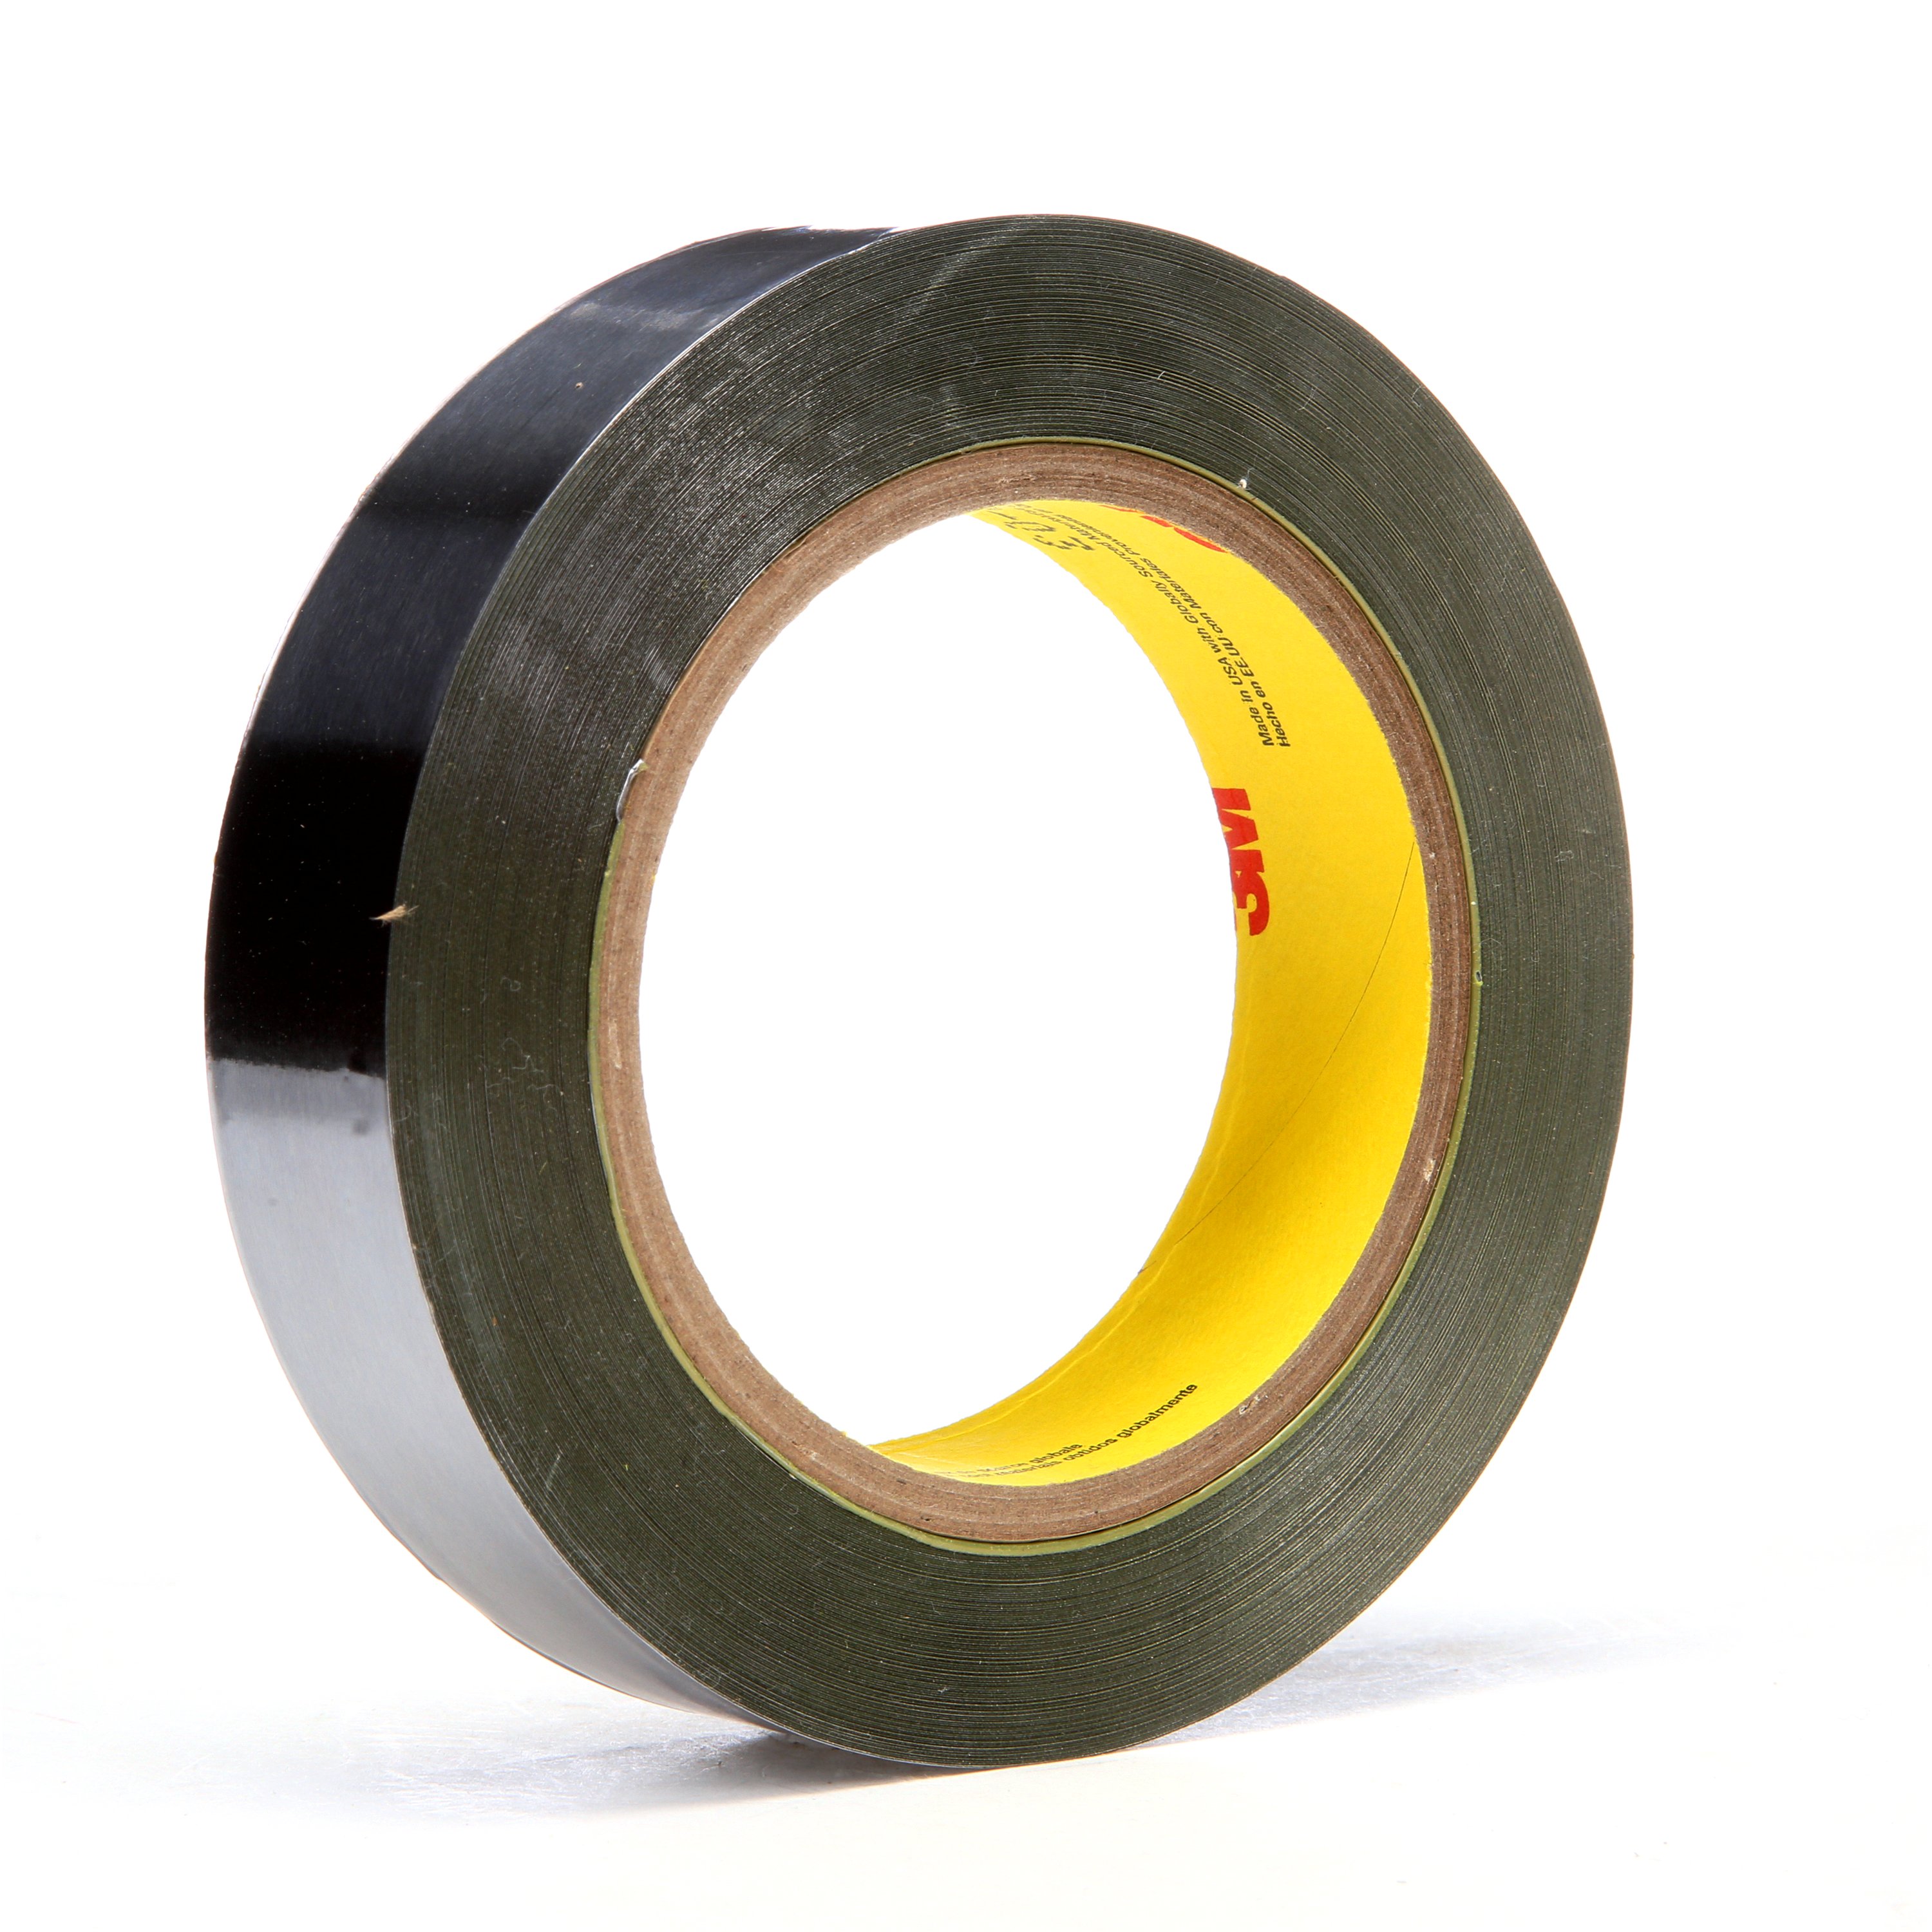 3M™ Lead Foil Tape 421  is a dark gray, lead foil backed tape is coated with a distinct green rubber adhesive that offers good initial grab and a long-lasting bond that removes cleanly for most surfaces.